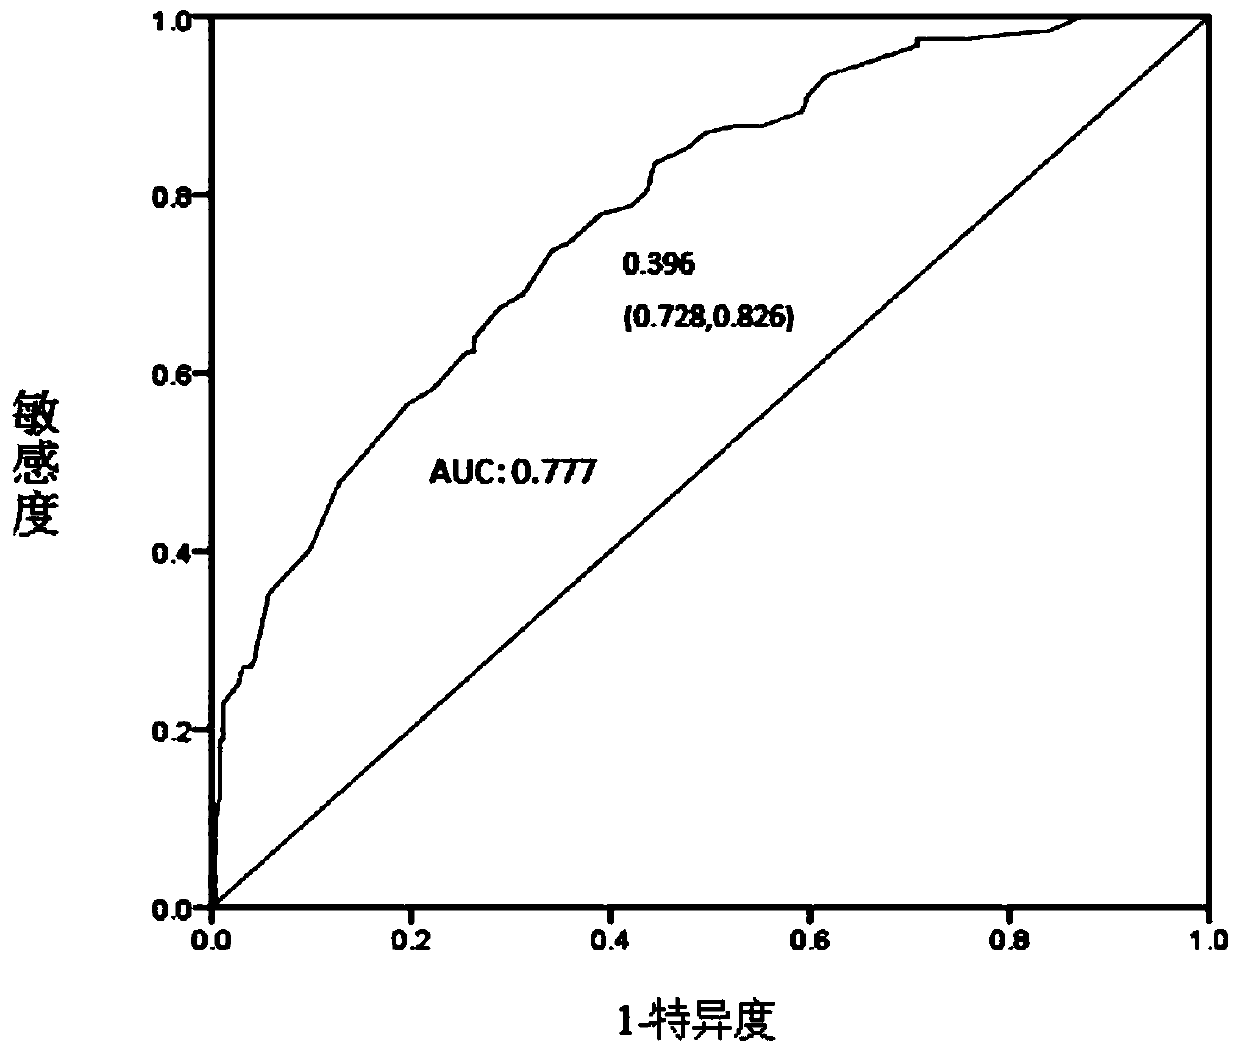 Lung cancer auxiliary diagnosis method based on ERCC5 gene and environmental polycyclic aromatic hydrocarbon exposure interaction